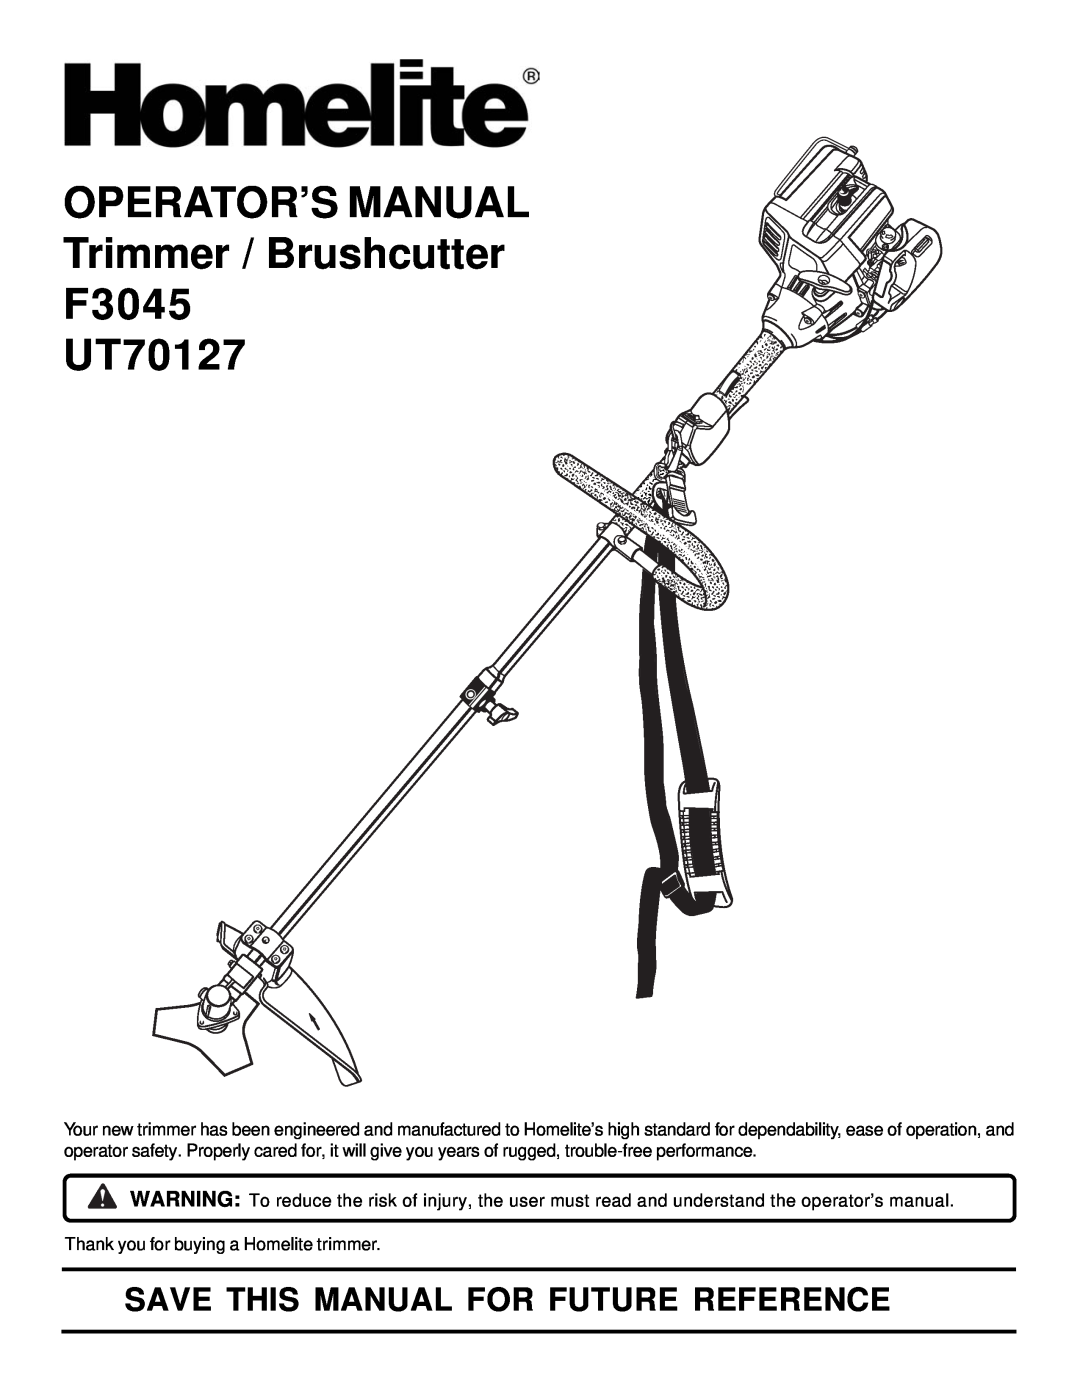 Homelite manual OPERATOR’S MANUAL Trimmer / Brushcutter F3045 UT70127, Save This Manual For Future Reference 